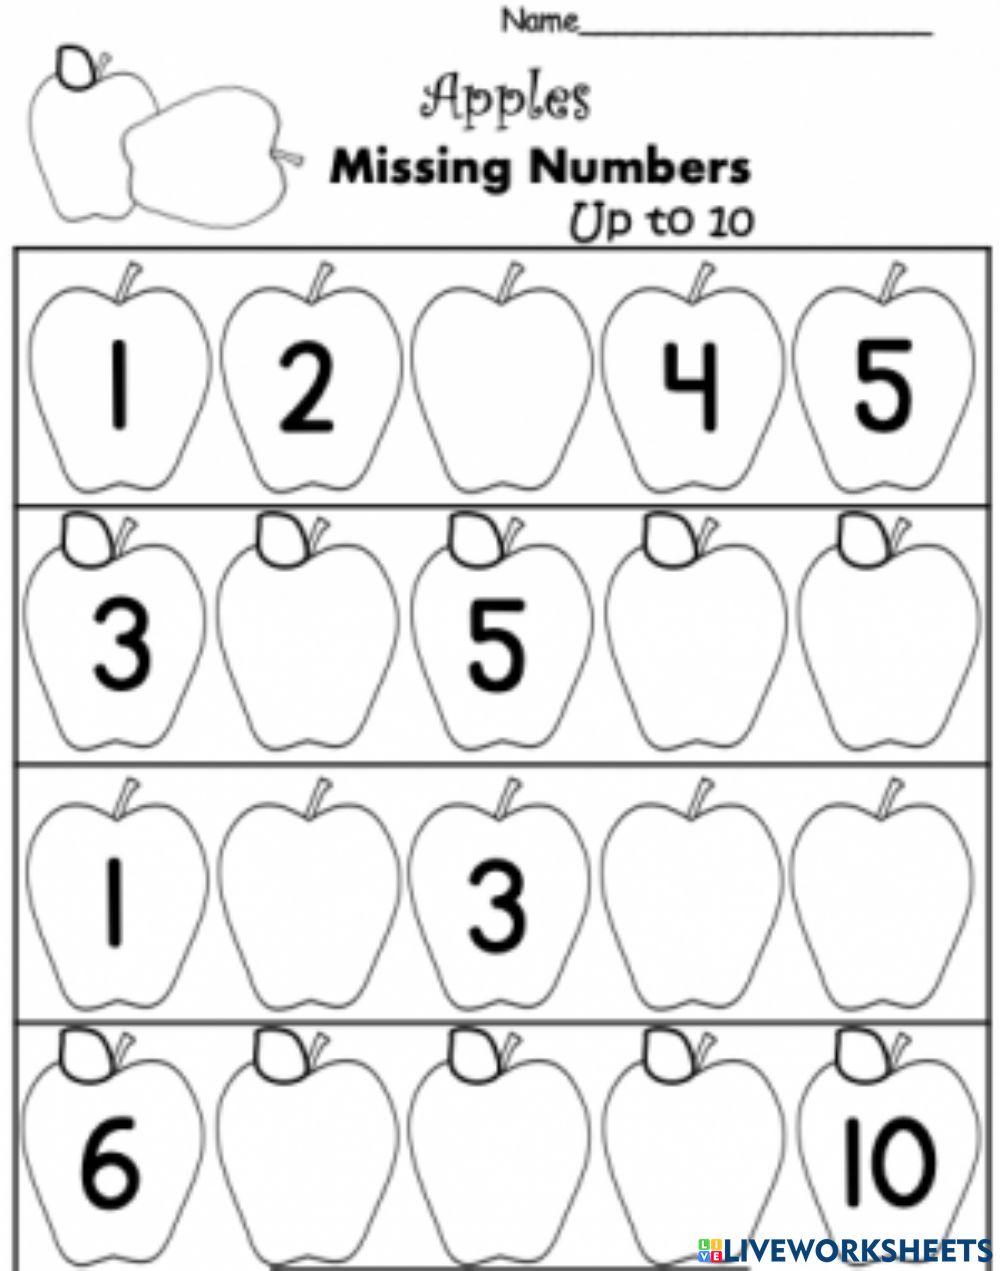 Write the missing Numbers